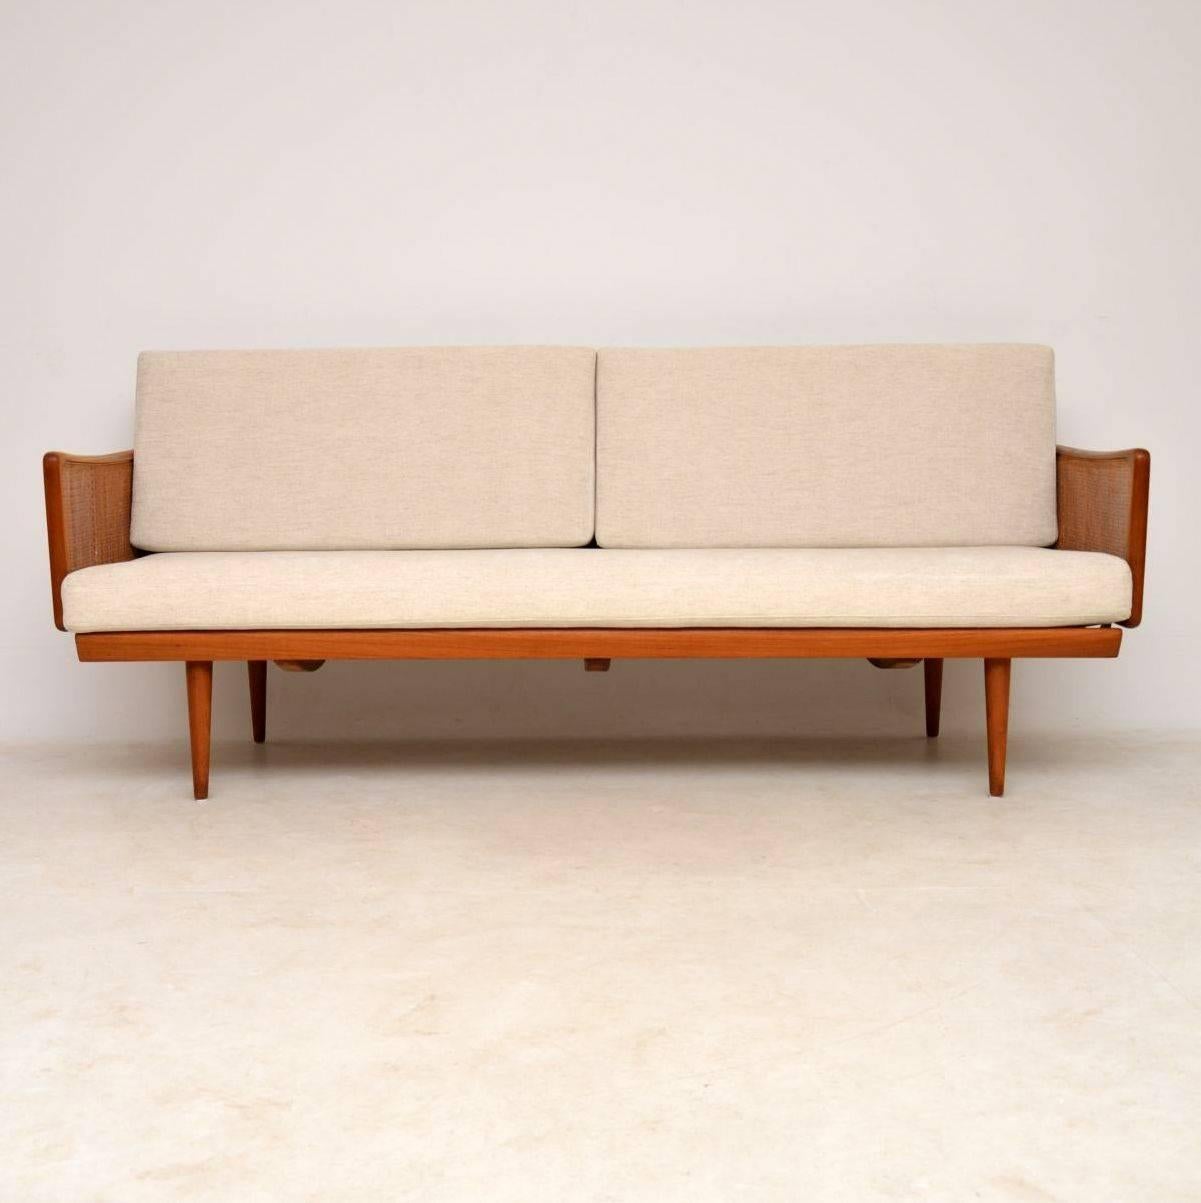 A stunning and very rare vintage Danish teak sofa, this was designed by Peter Hvidt and Orla Mølgaard-Nielsen. It was made by France and Daverkosen and it has the original badge intact, which means it can be dated to somewhere between 1953 and 1957